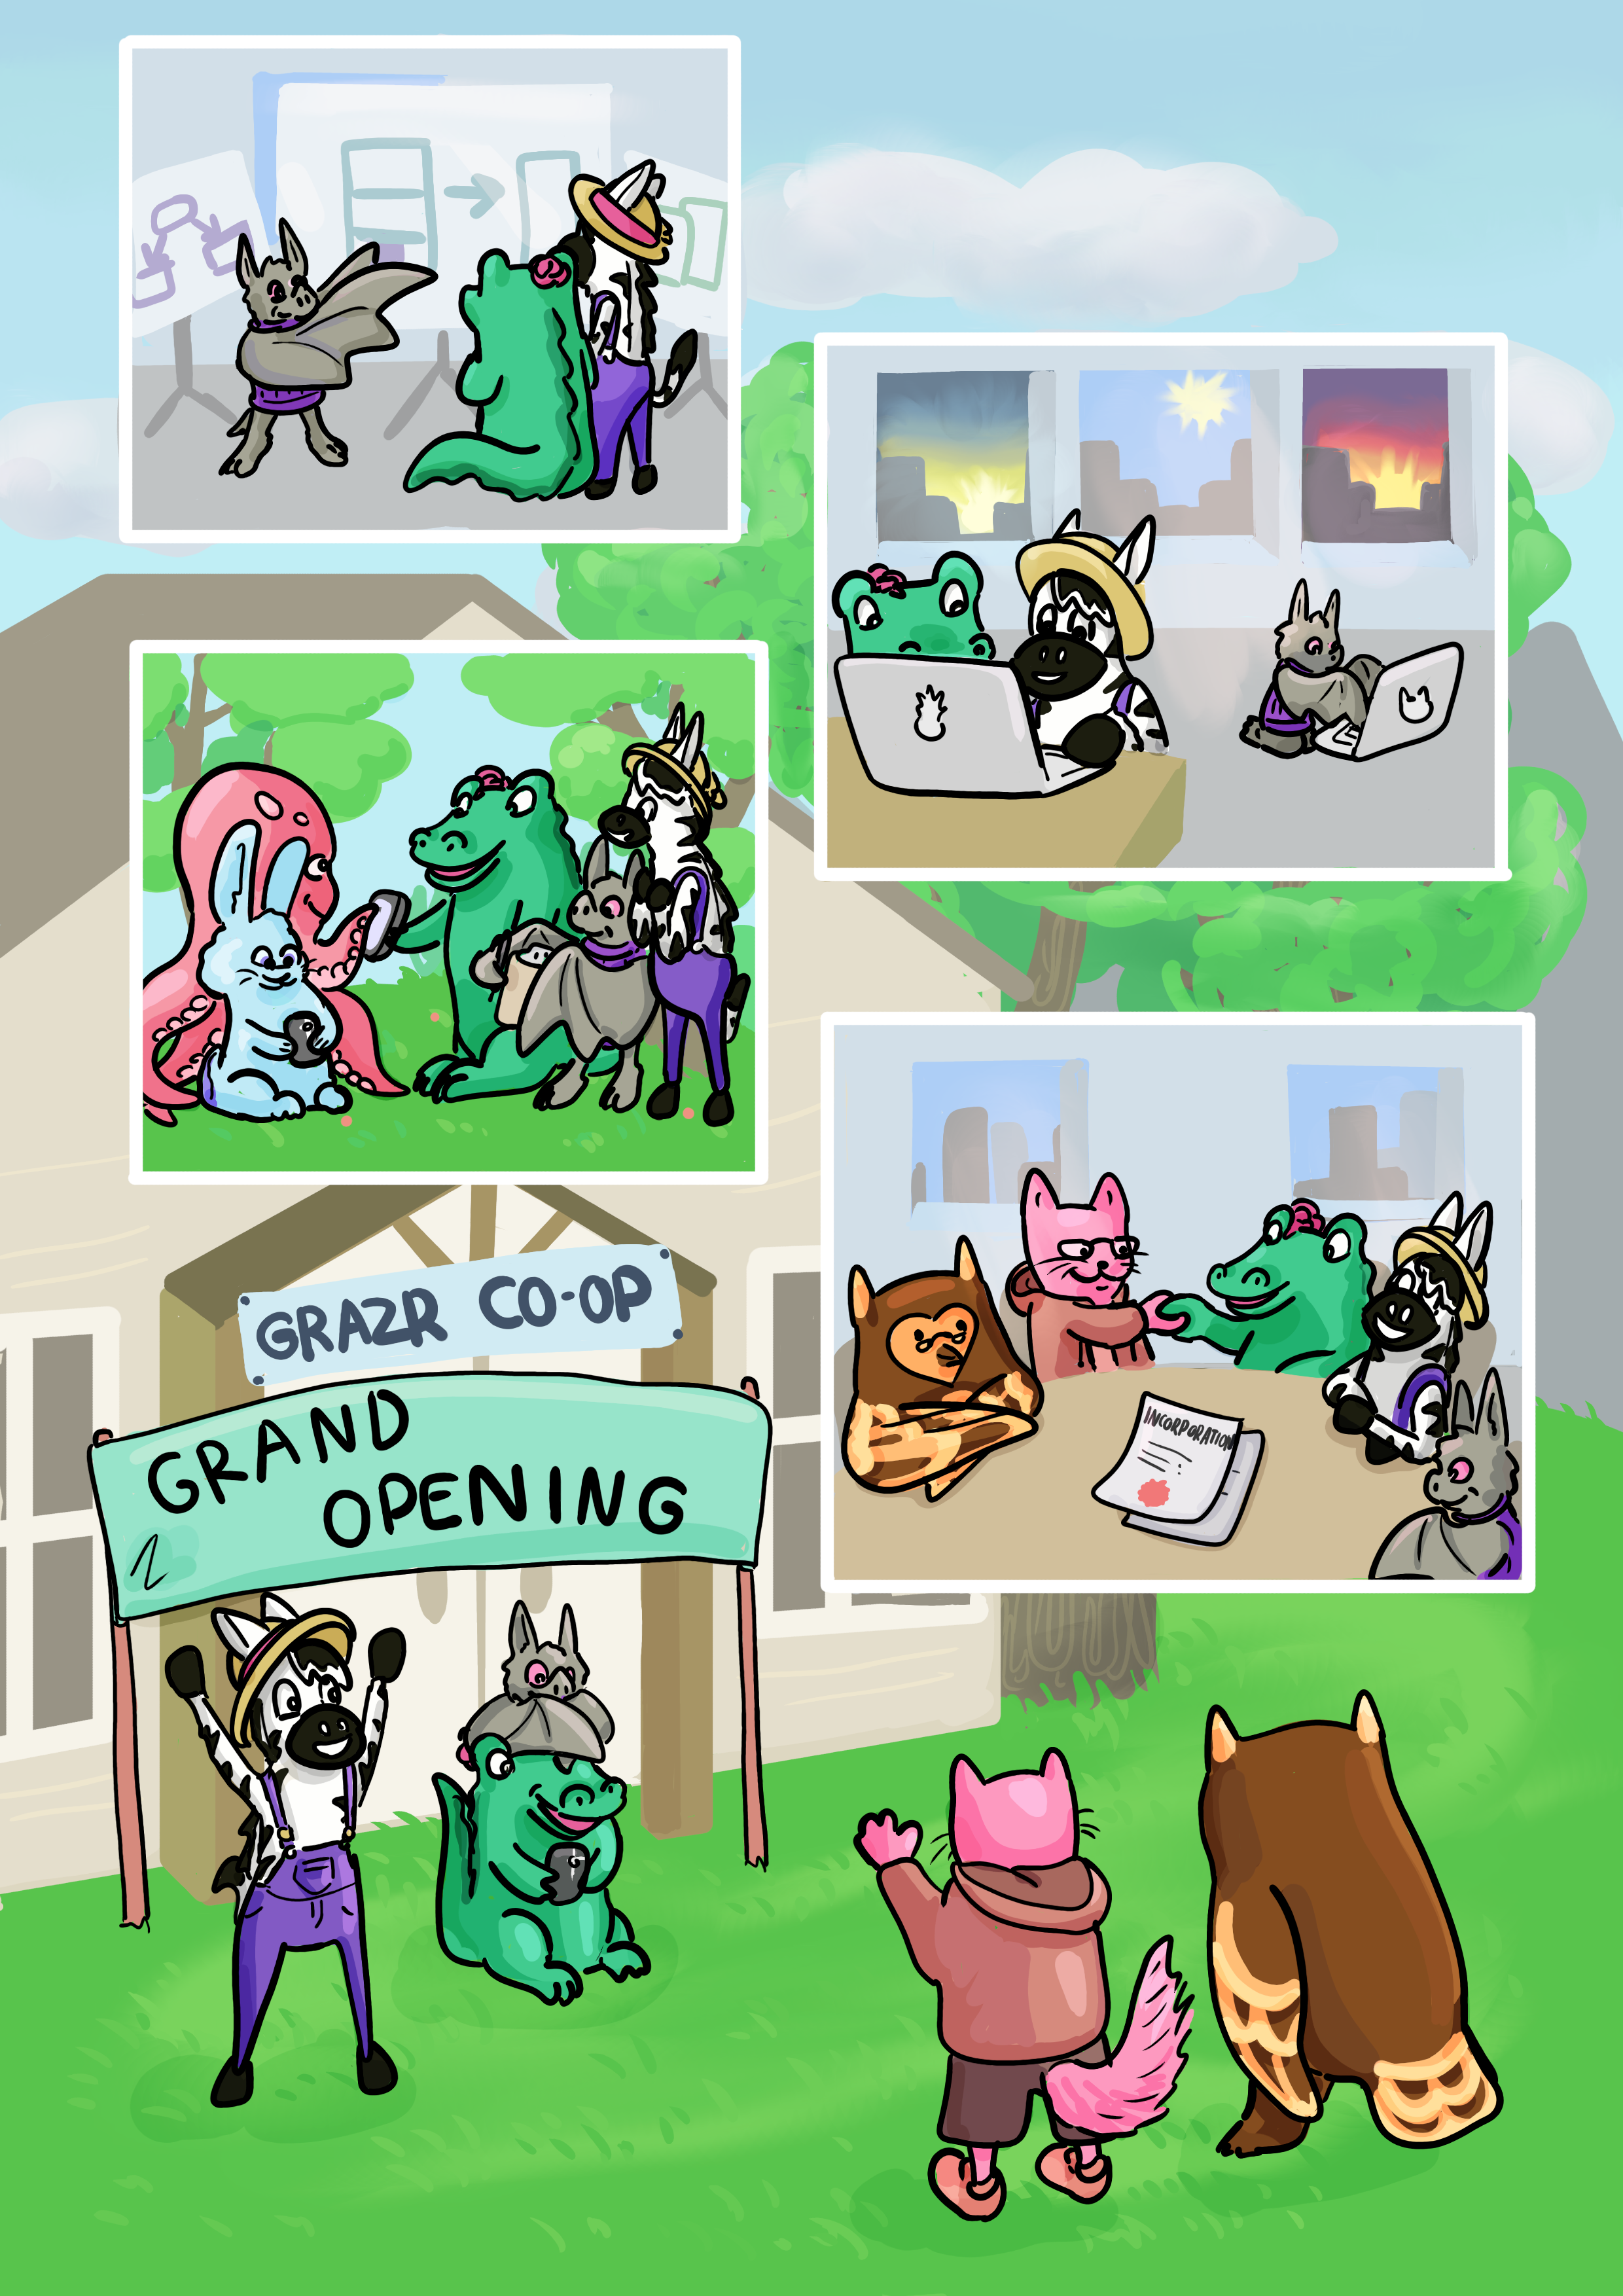 Page 8. We see the animals in the process of developing their co-op, named Grazer. Panel 1: At the Grazr office. Bat is explaining UX diagrams to Alligator and Zebra.

        Panel 2: The animals are working on the Grazr app on their laptops. We see that the time of day changes from morning to night.

        Panel 3: In the Grazelands, the animals are doing user research. They are showing the app to Octopus and Bunny. Bat is writing down notes on a clipboard.

        Panel 4: Back in the office, the animals, the community investor, and Owl, are discussing incorporation documents. Alligator and the community investor shake hands.

        Panel 5: In the Grazelands, at the grand opening of the Grazr co-operative. Zebra is raising his arms in front of the Grazr buildings, and Bat is sitting on Alligator's head. Owl and the community investors come to show support to the co-op members.